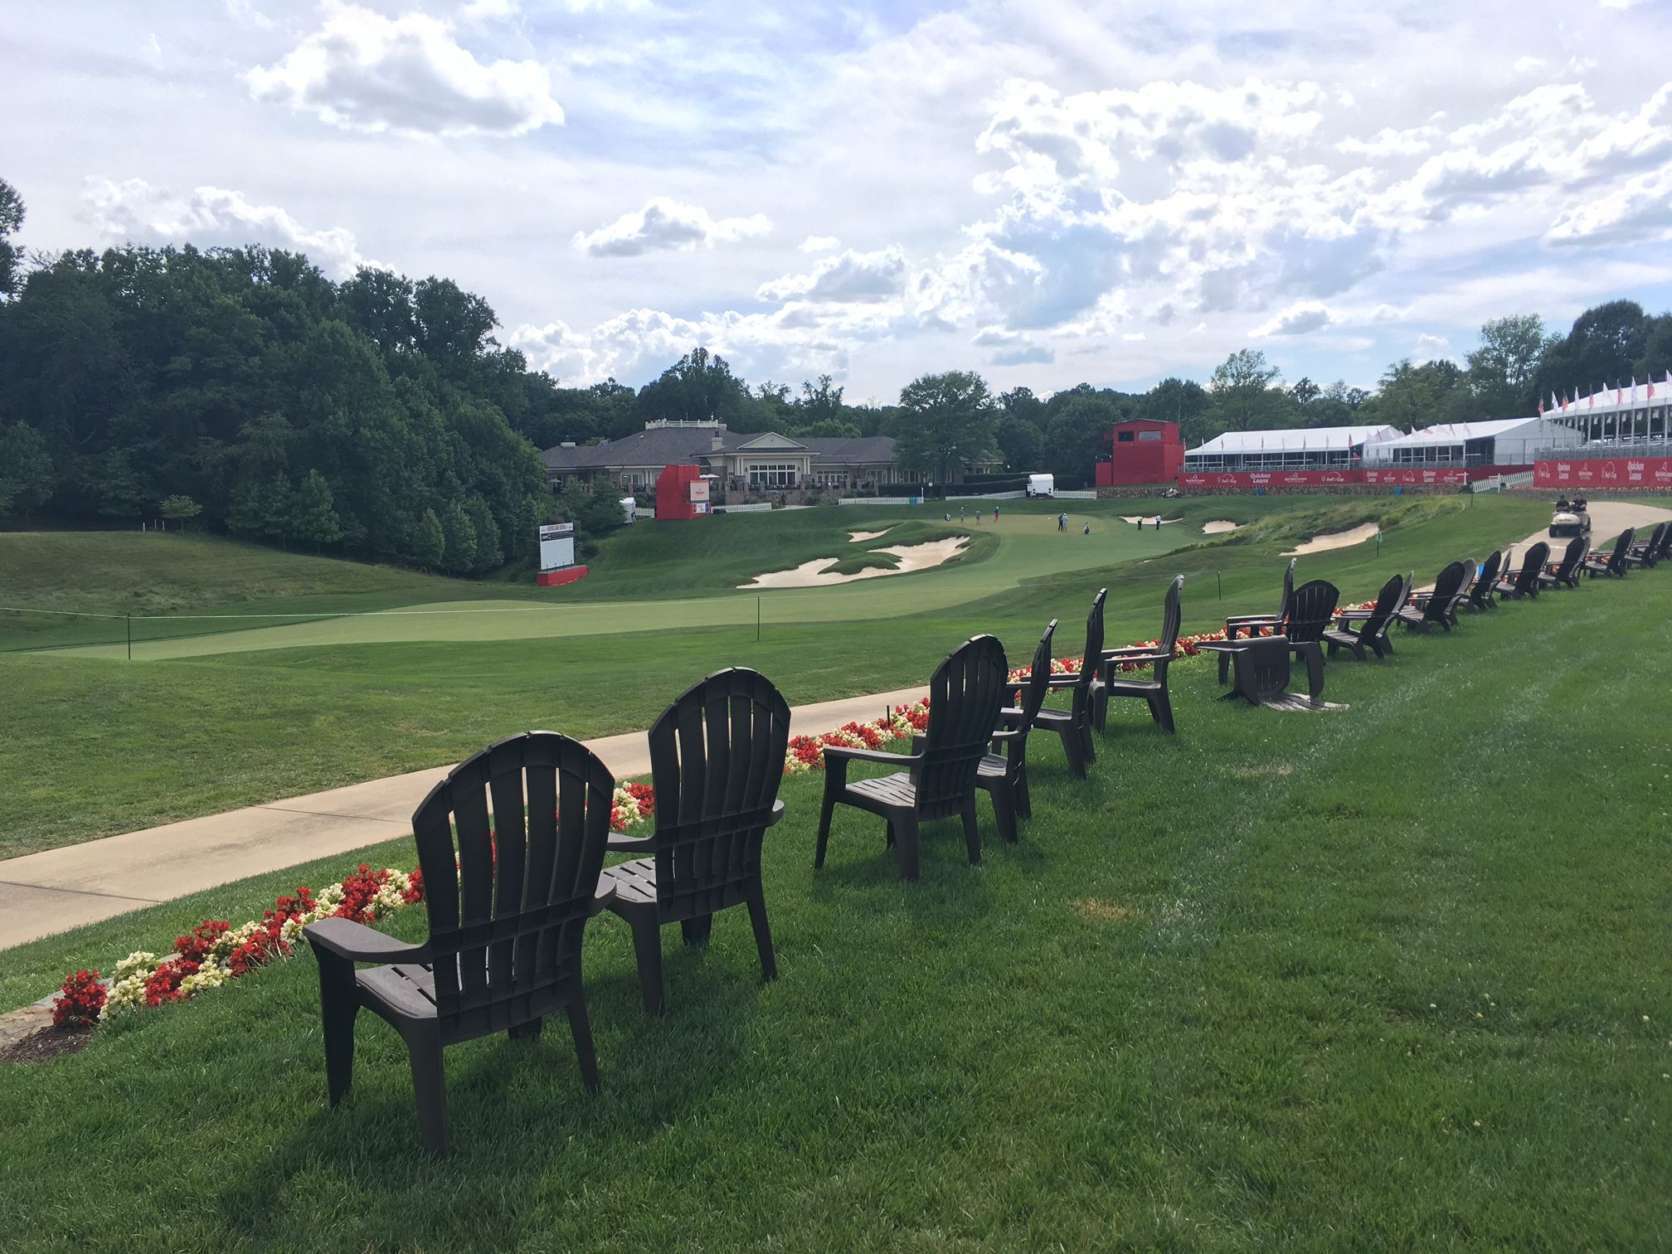 There's a decent amount of room and a couple lines of wooden chairs for spectators along the approach to 18, offering plenty of options other than just the bleachers above the green. (WTOP/Noah Frank)